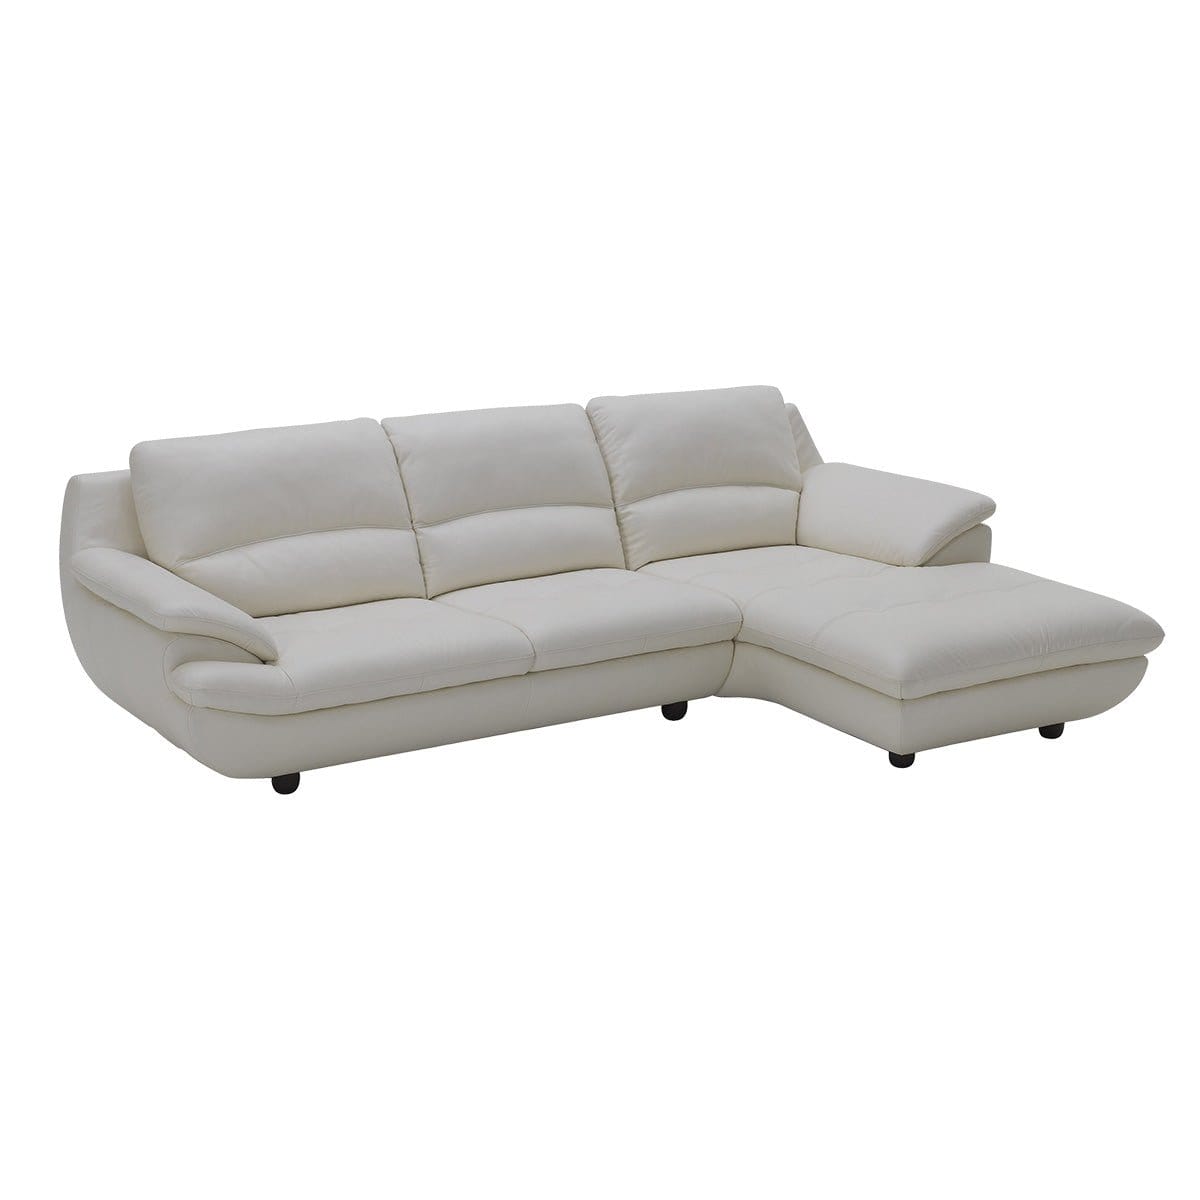 KUKA #1235 Full Leather Sofa (2+CL, Chaise Lounge) (M Series) (I) picket and rail